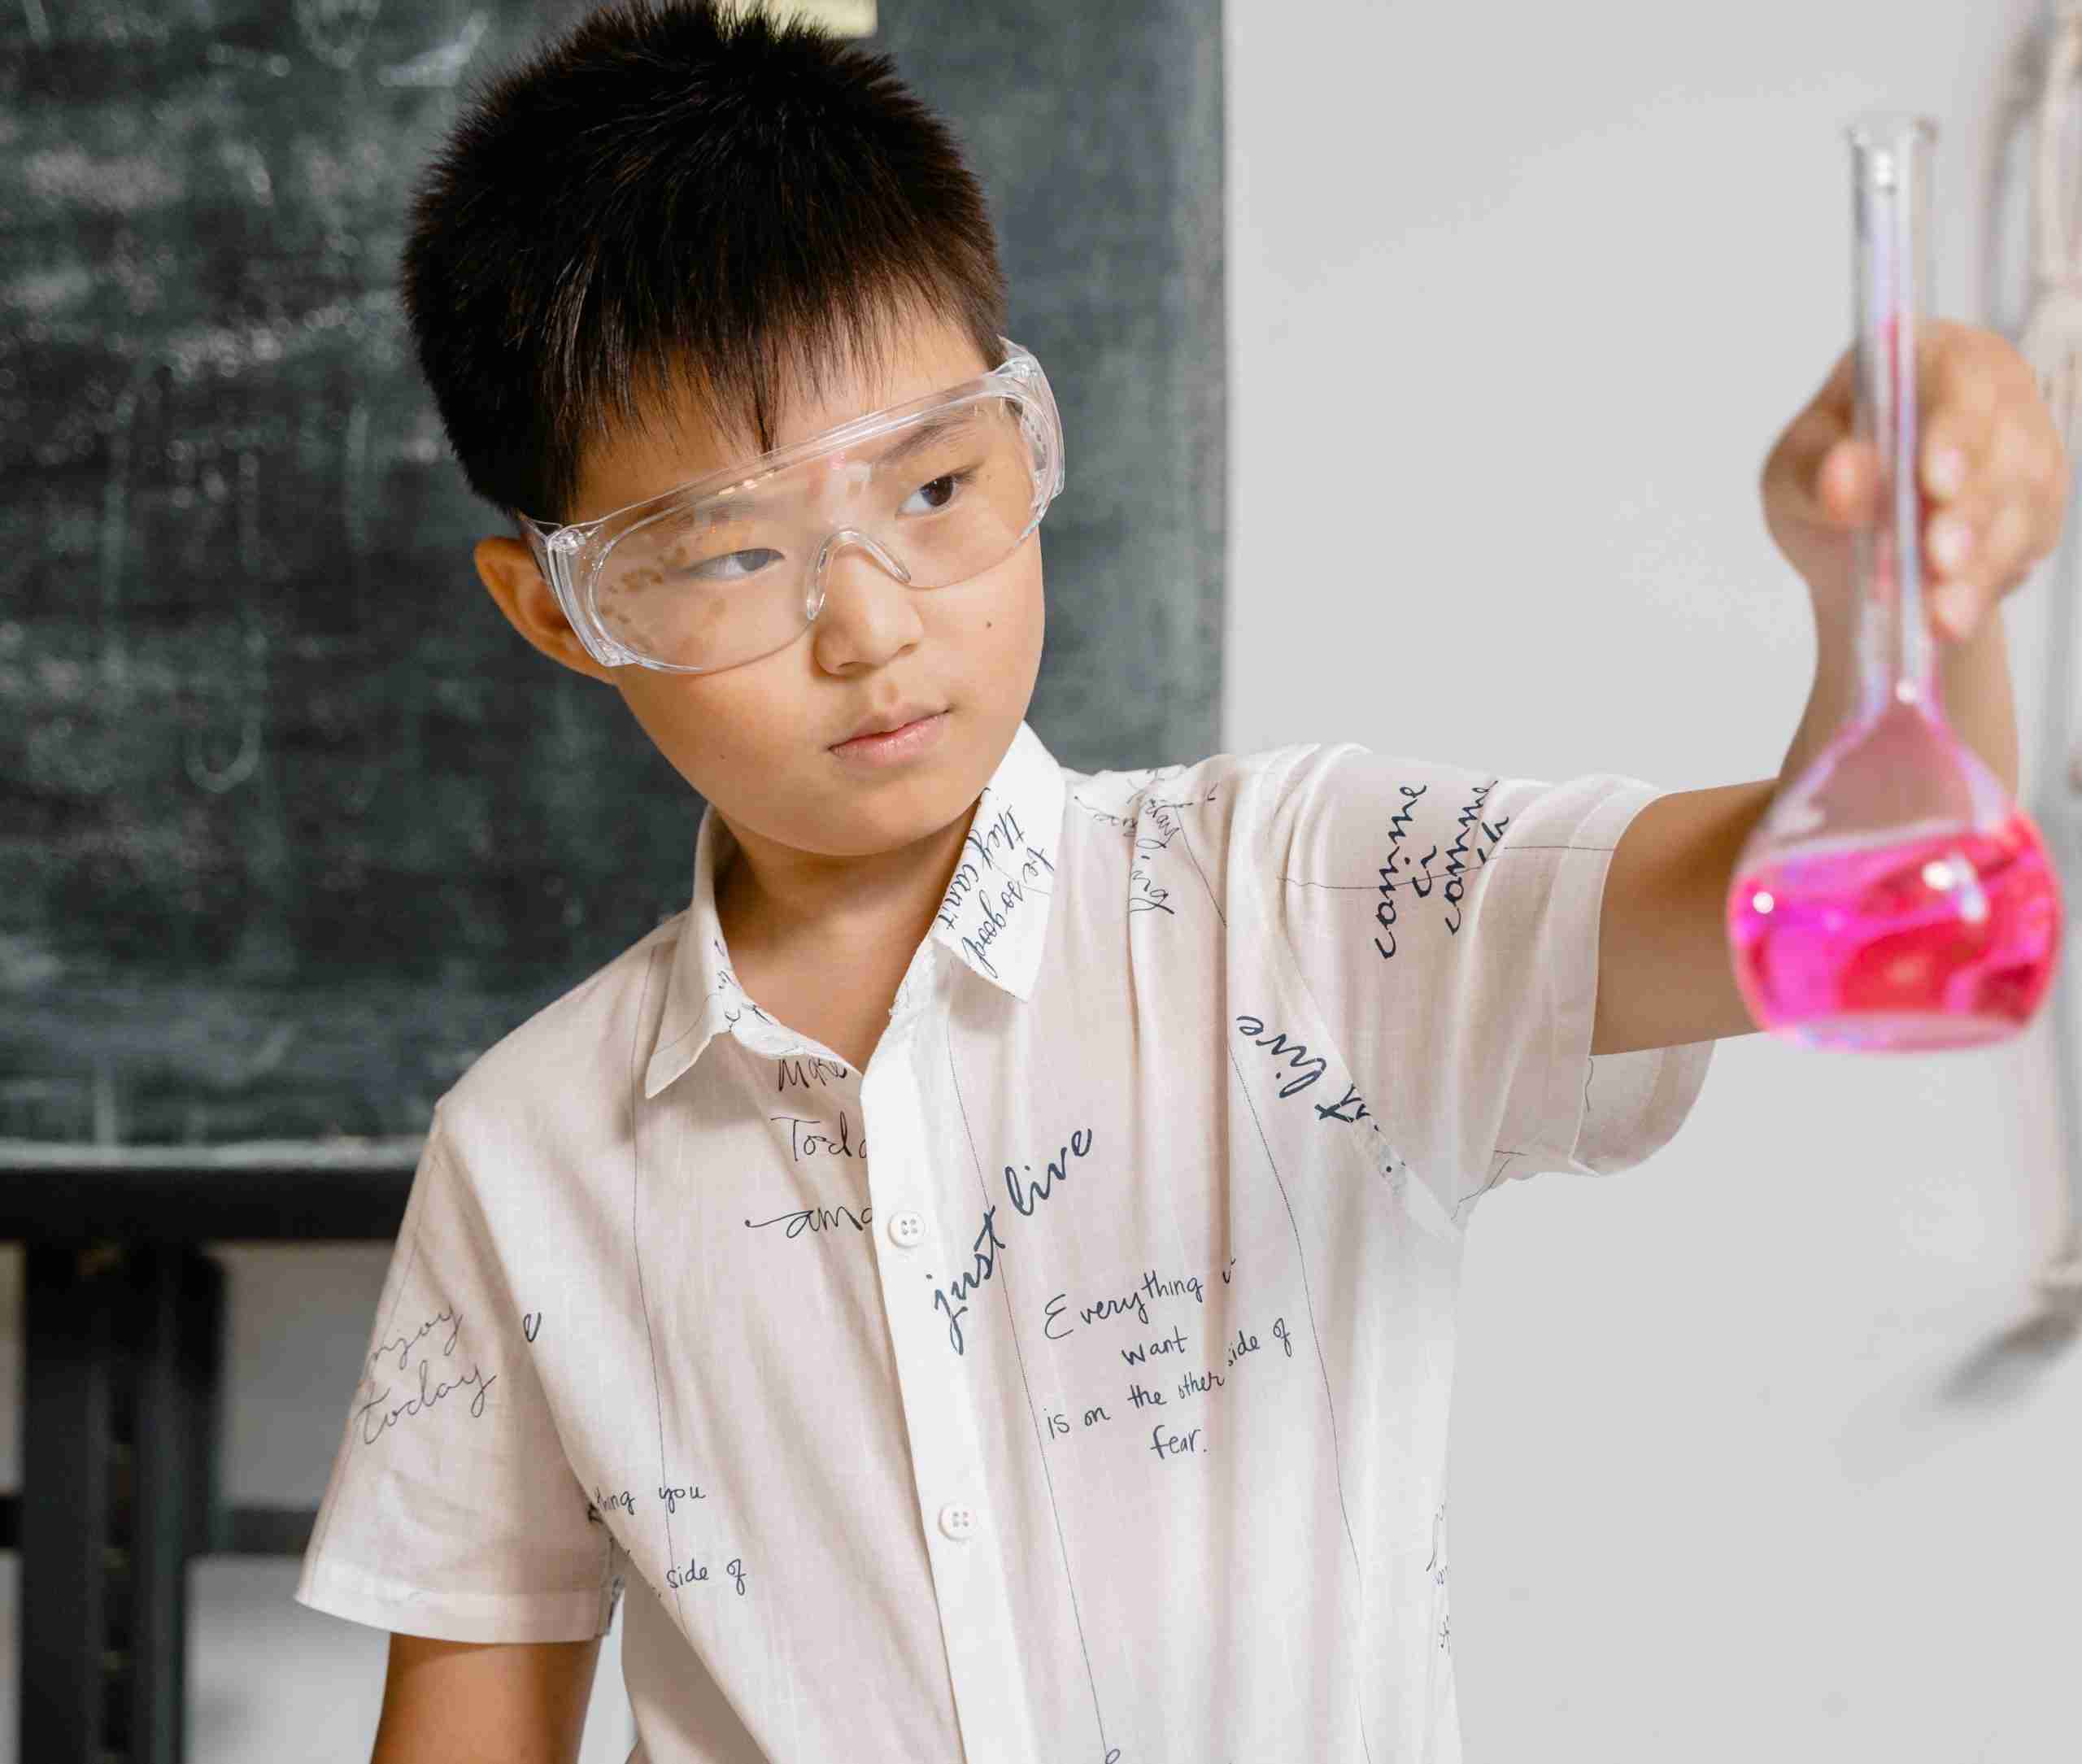 Boy in science class, with goggles, holding a beaker with bright pink content